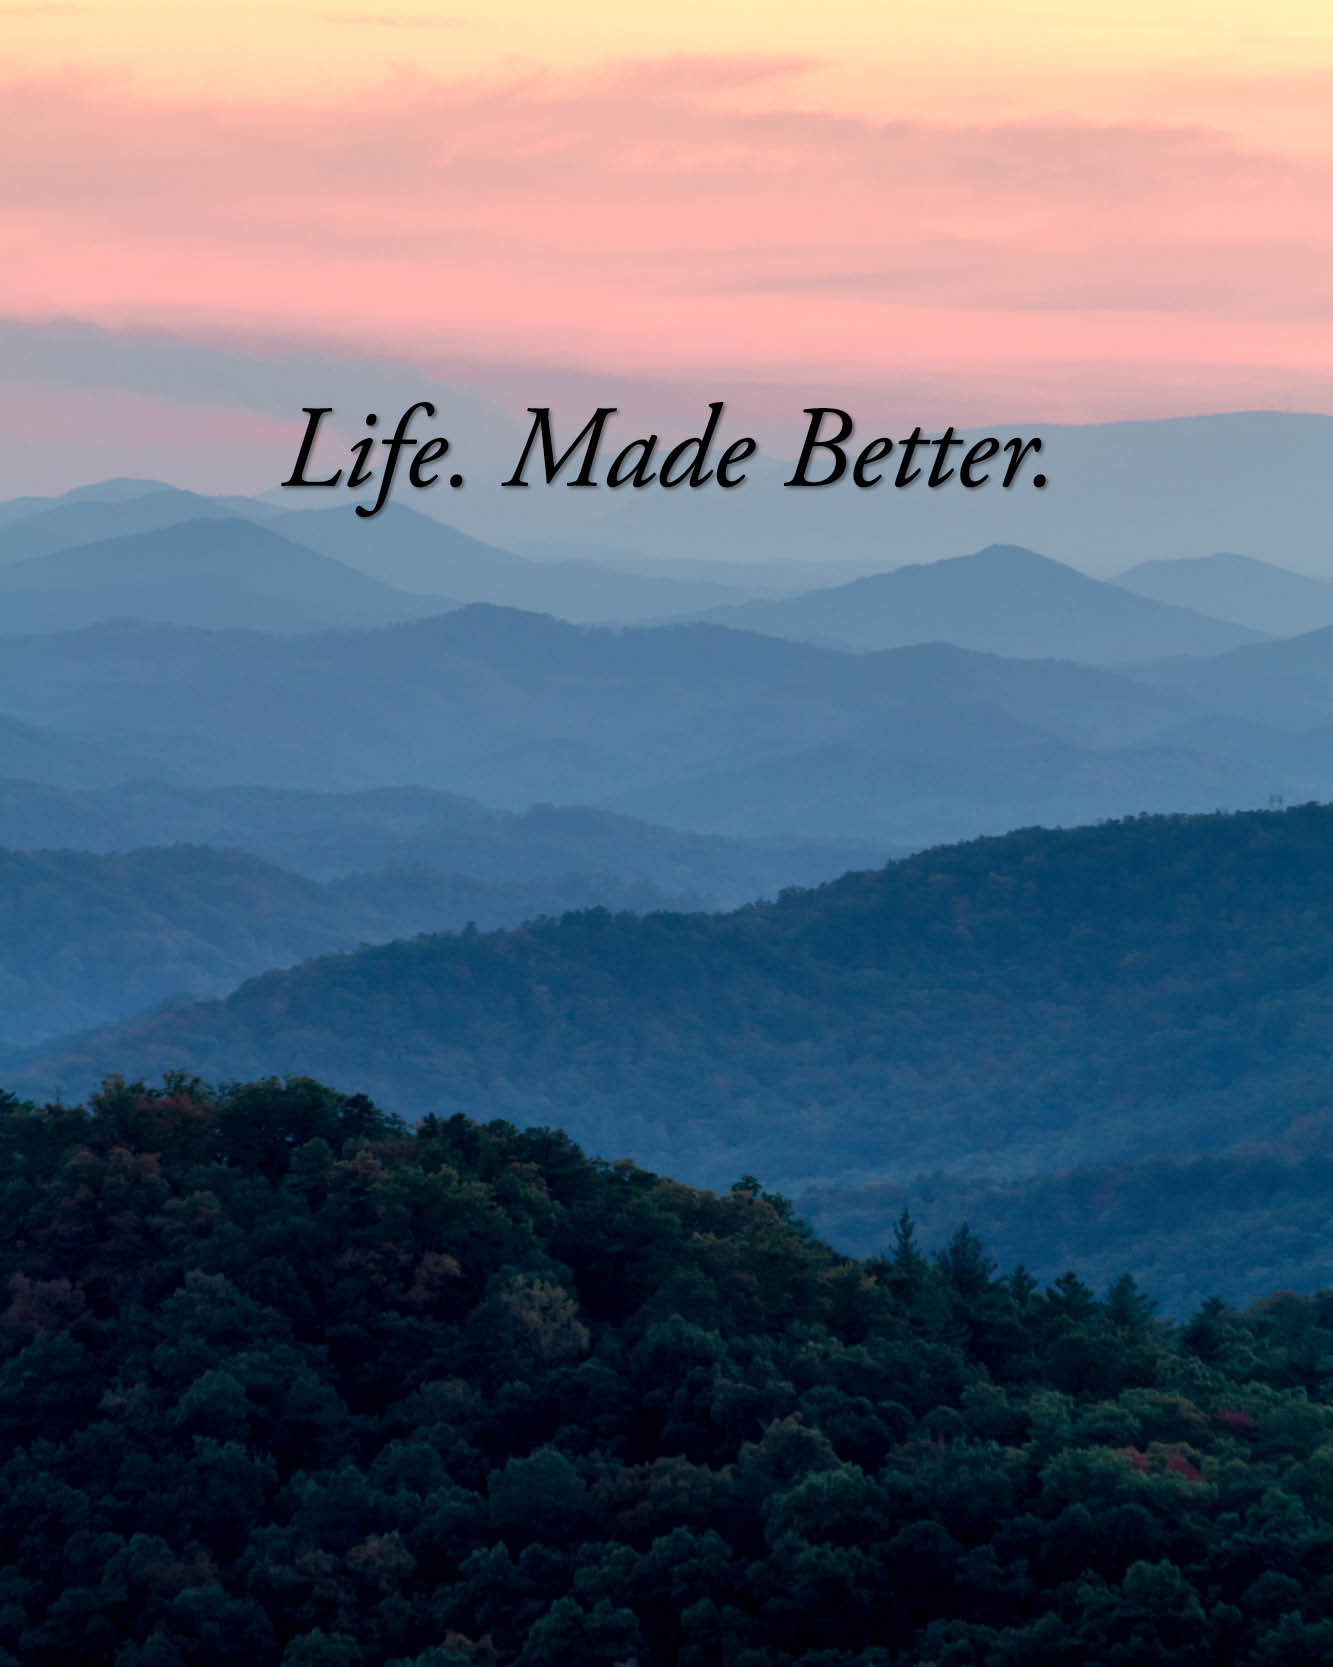 mountains with "Life. Made Better."